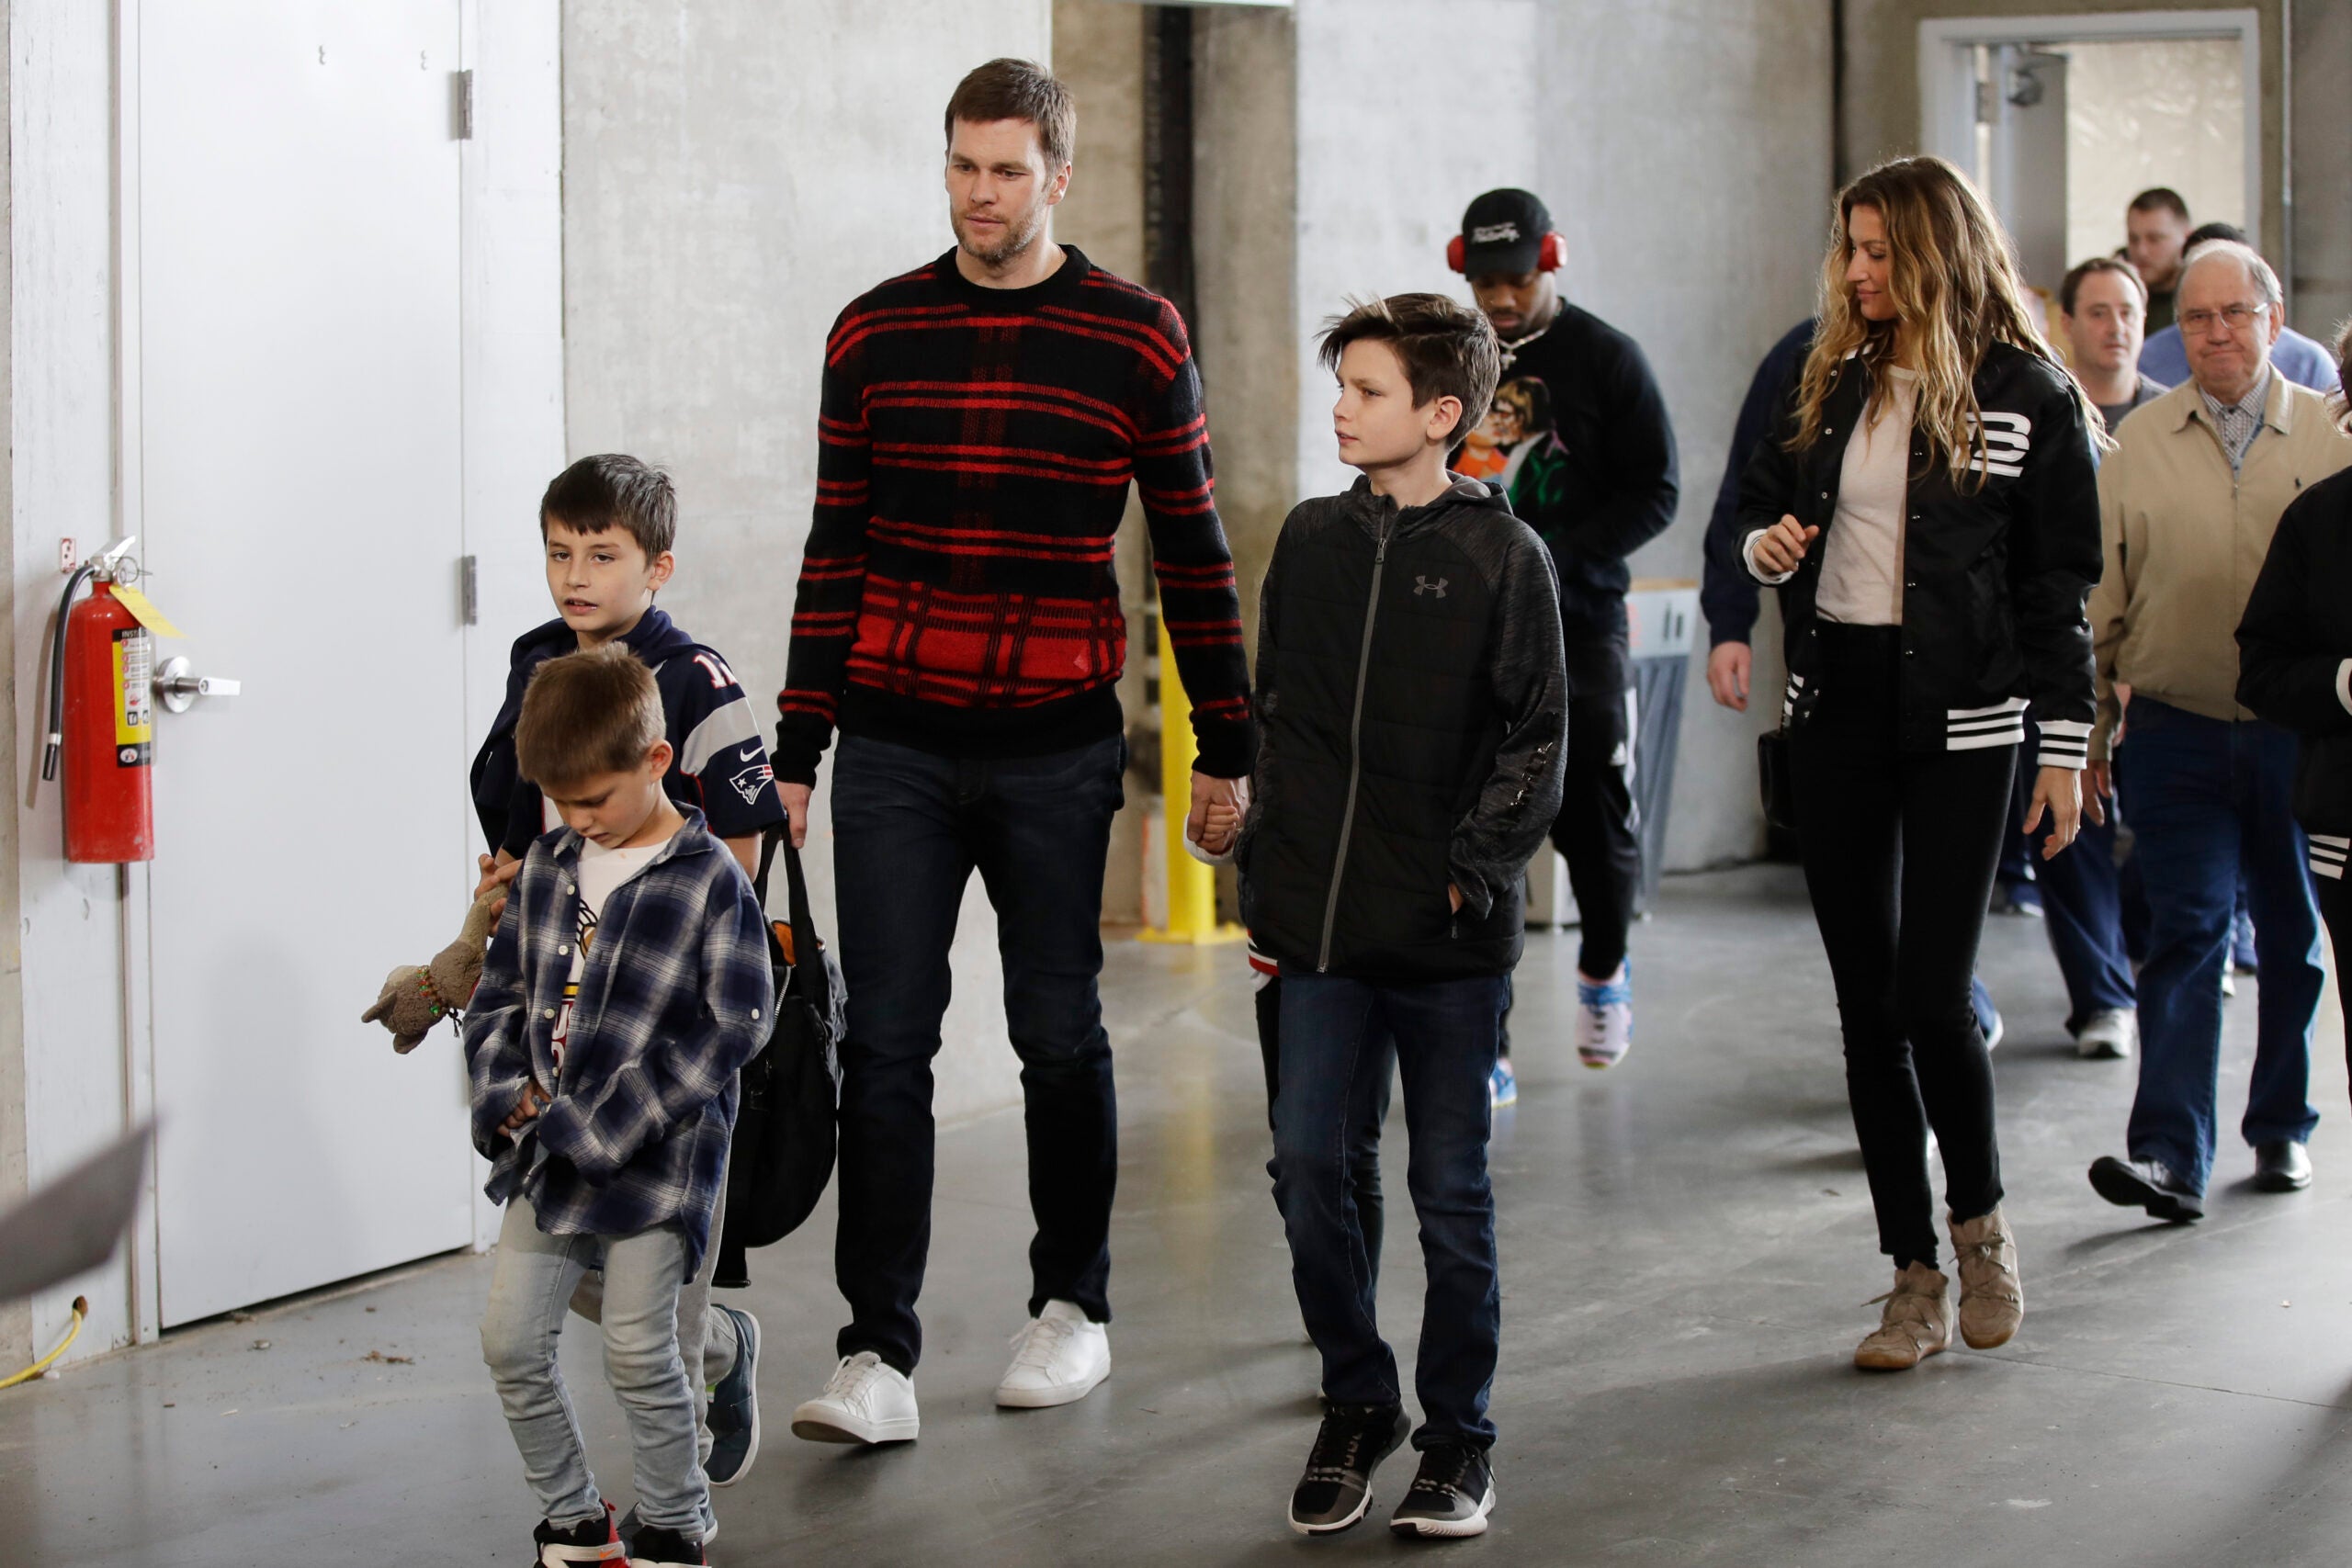 The Brady family's annual Super Bowl photos are back